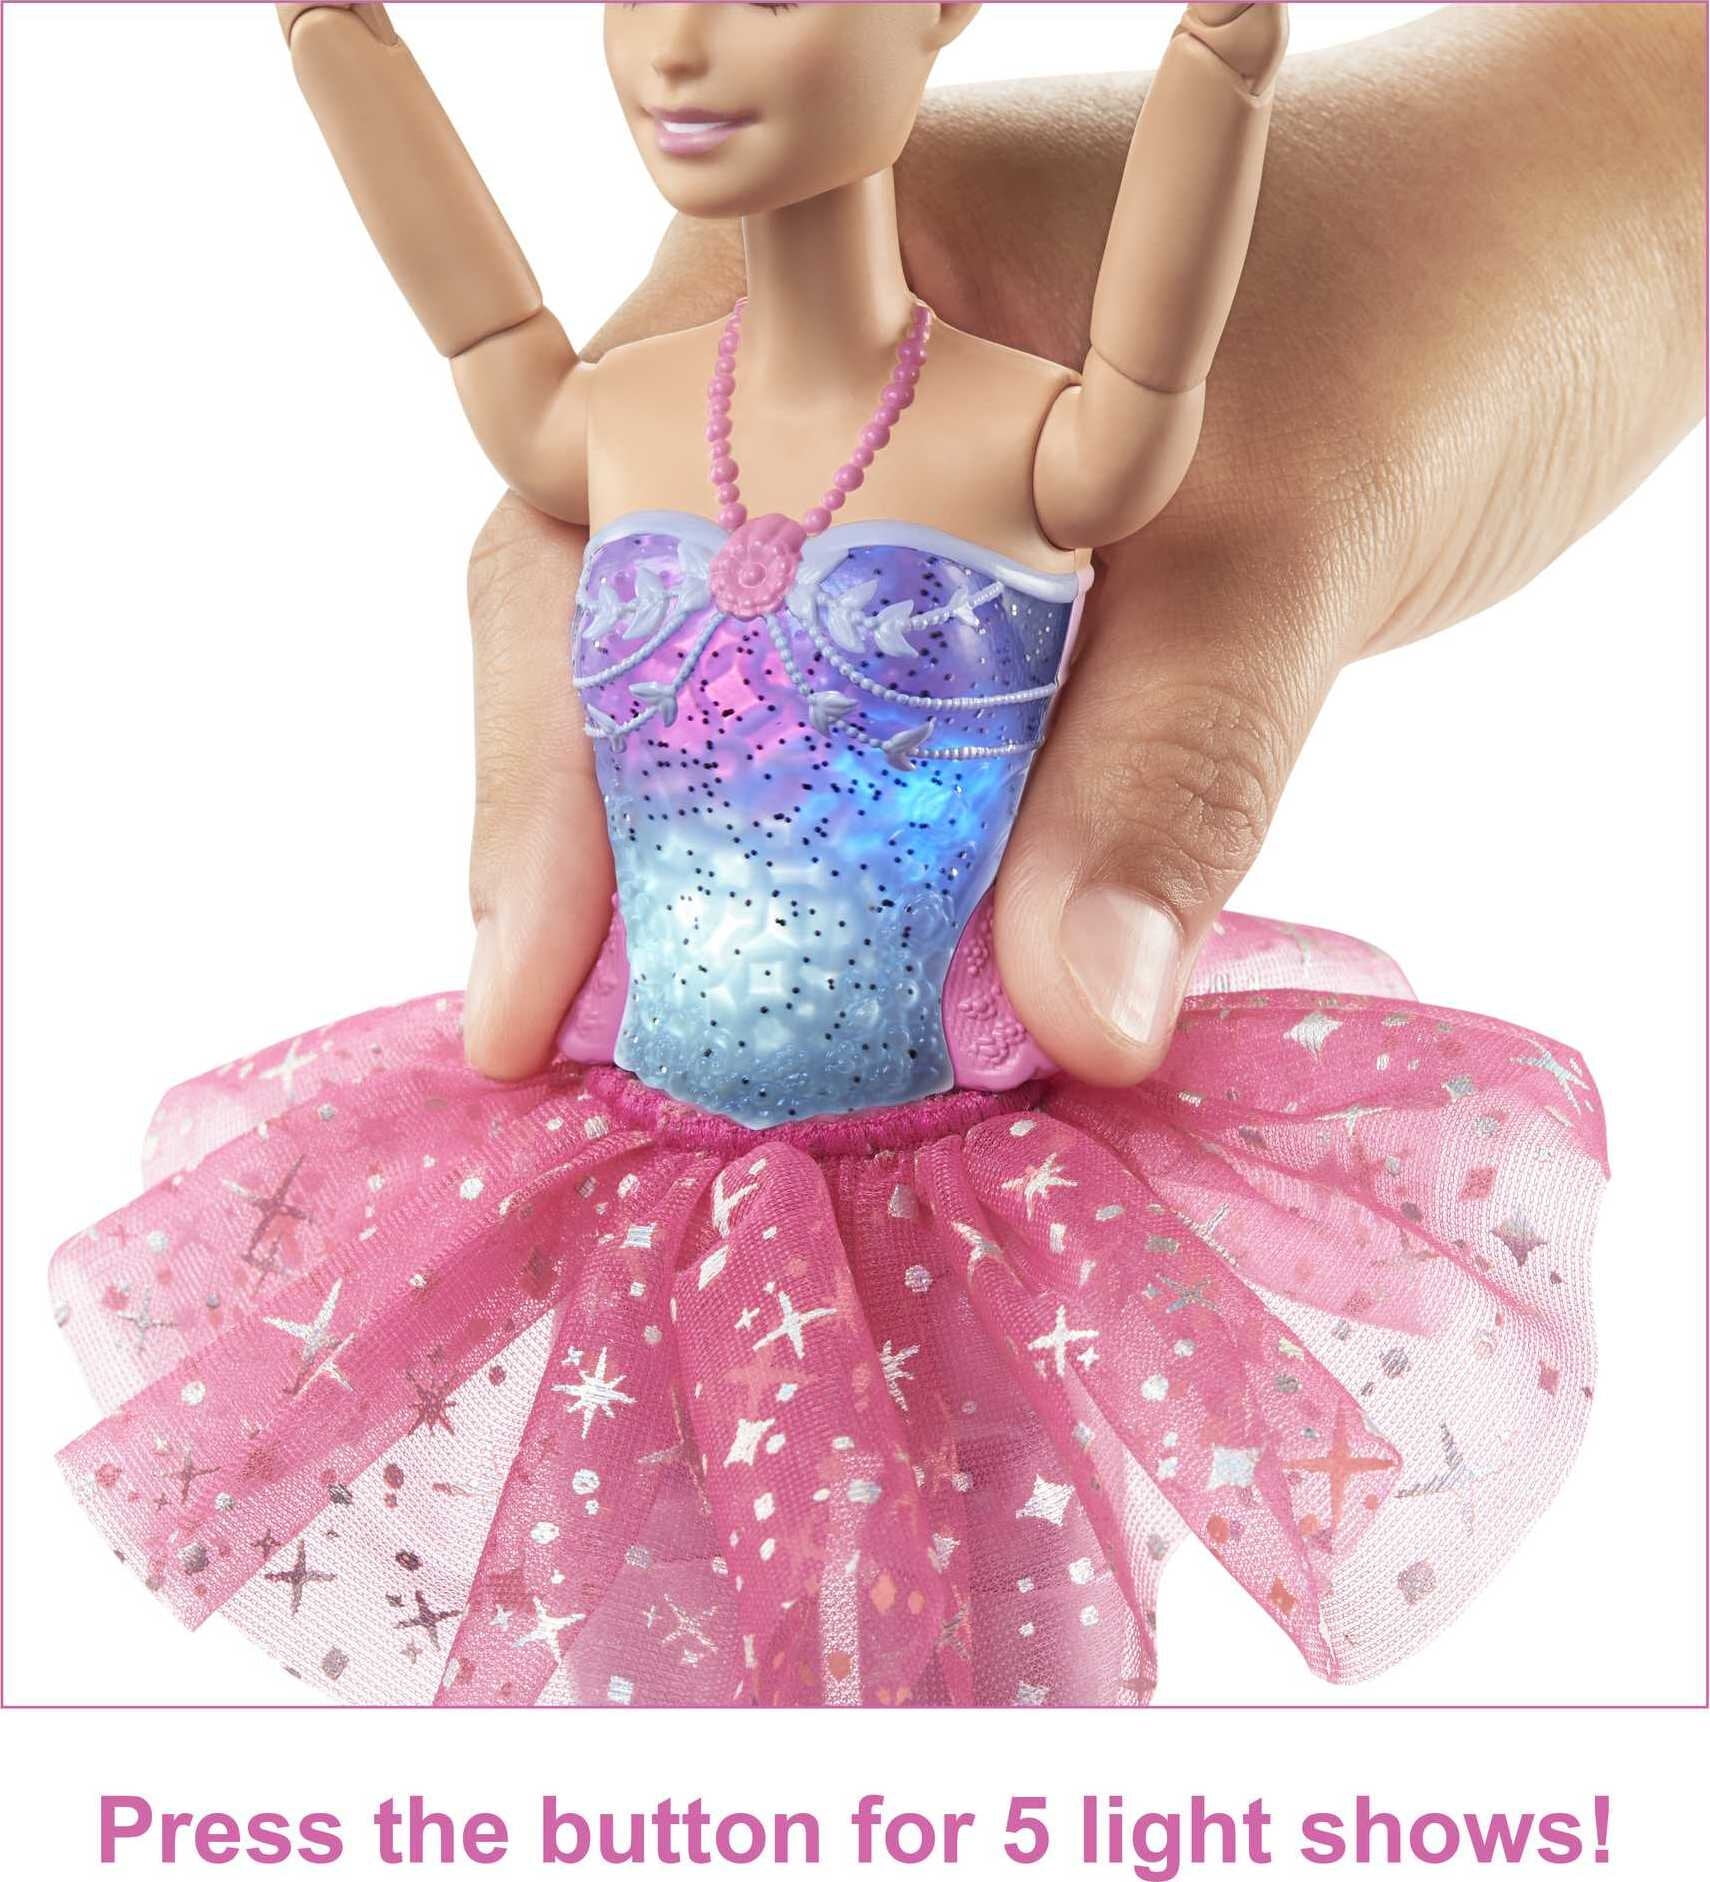 Barbie Dreamtopia Twinkle Lights Ballerina Doll, 11.7 in Blonde with  Light-up Feature, Tiara & Tutu